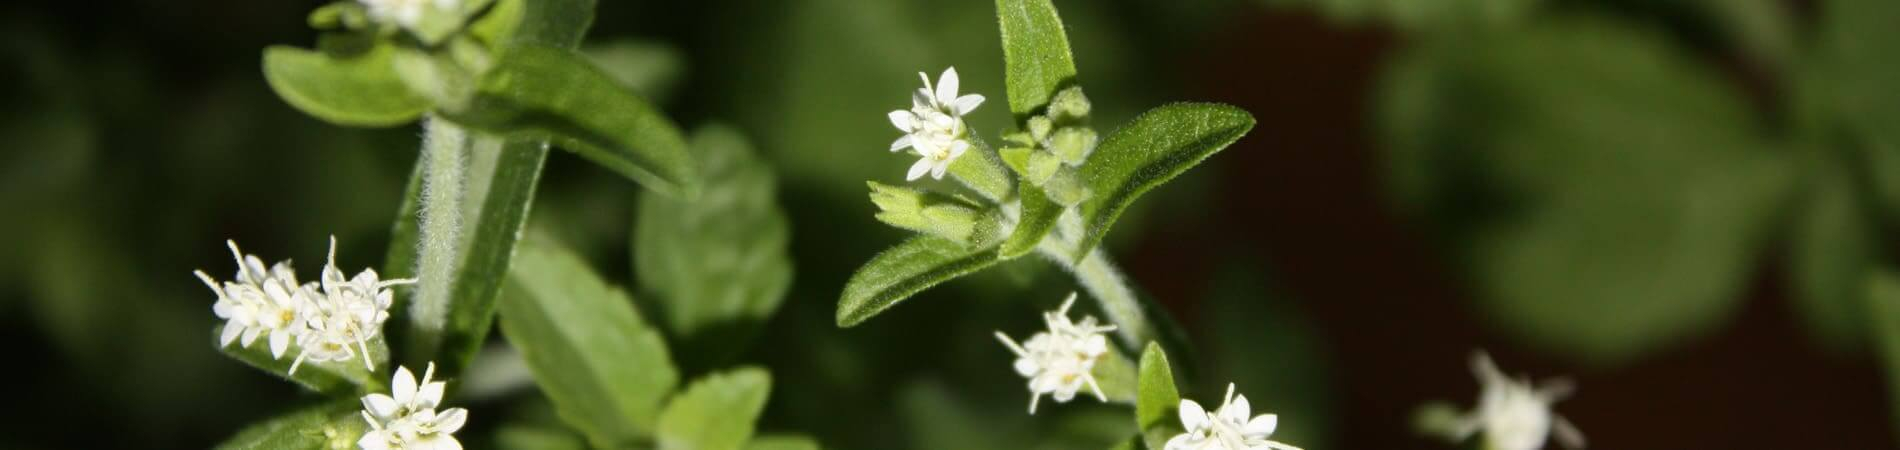 What is Stevia - Flower of the Stevia plant - Information...